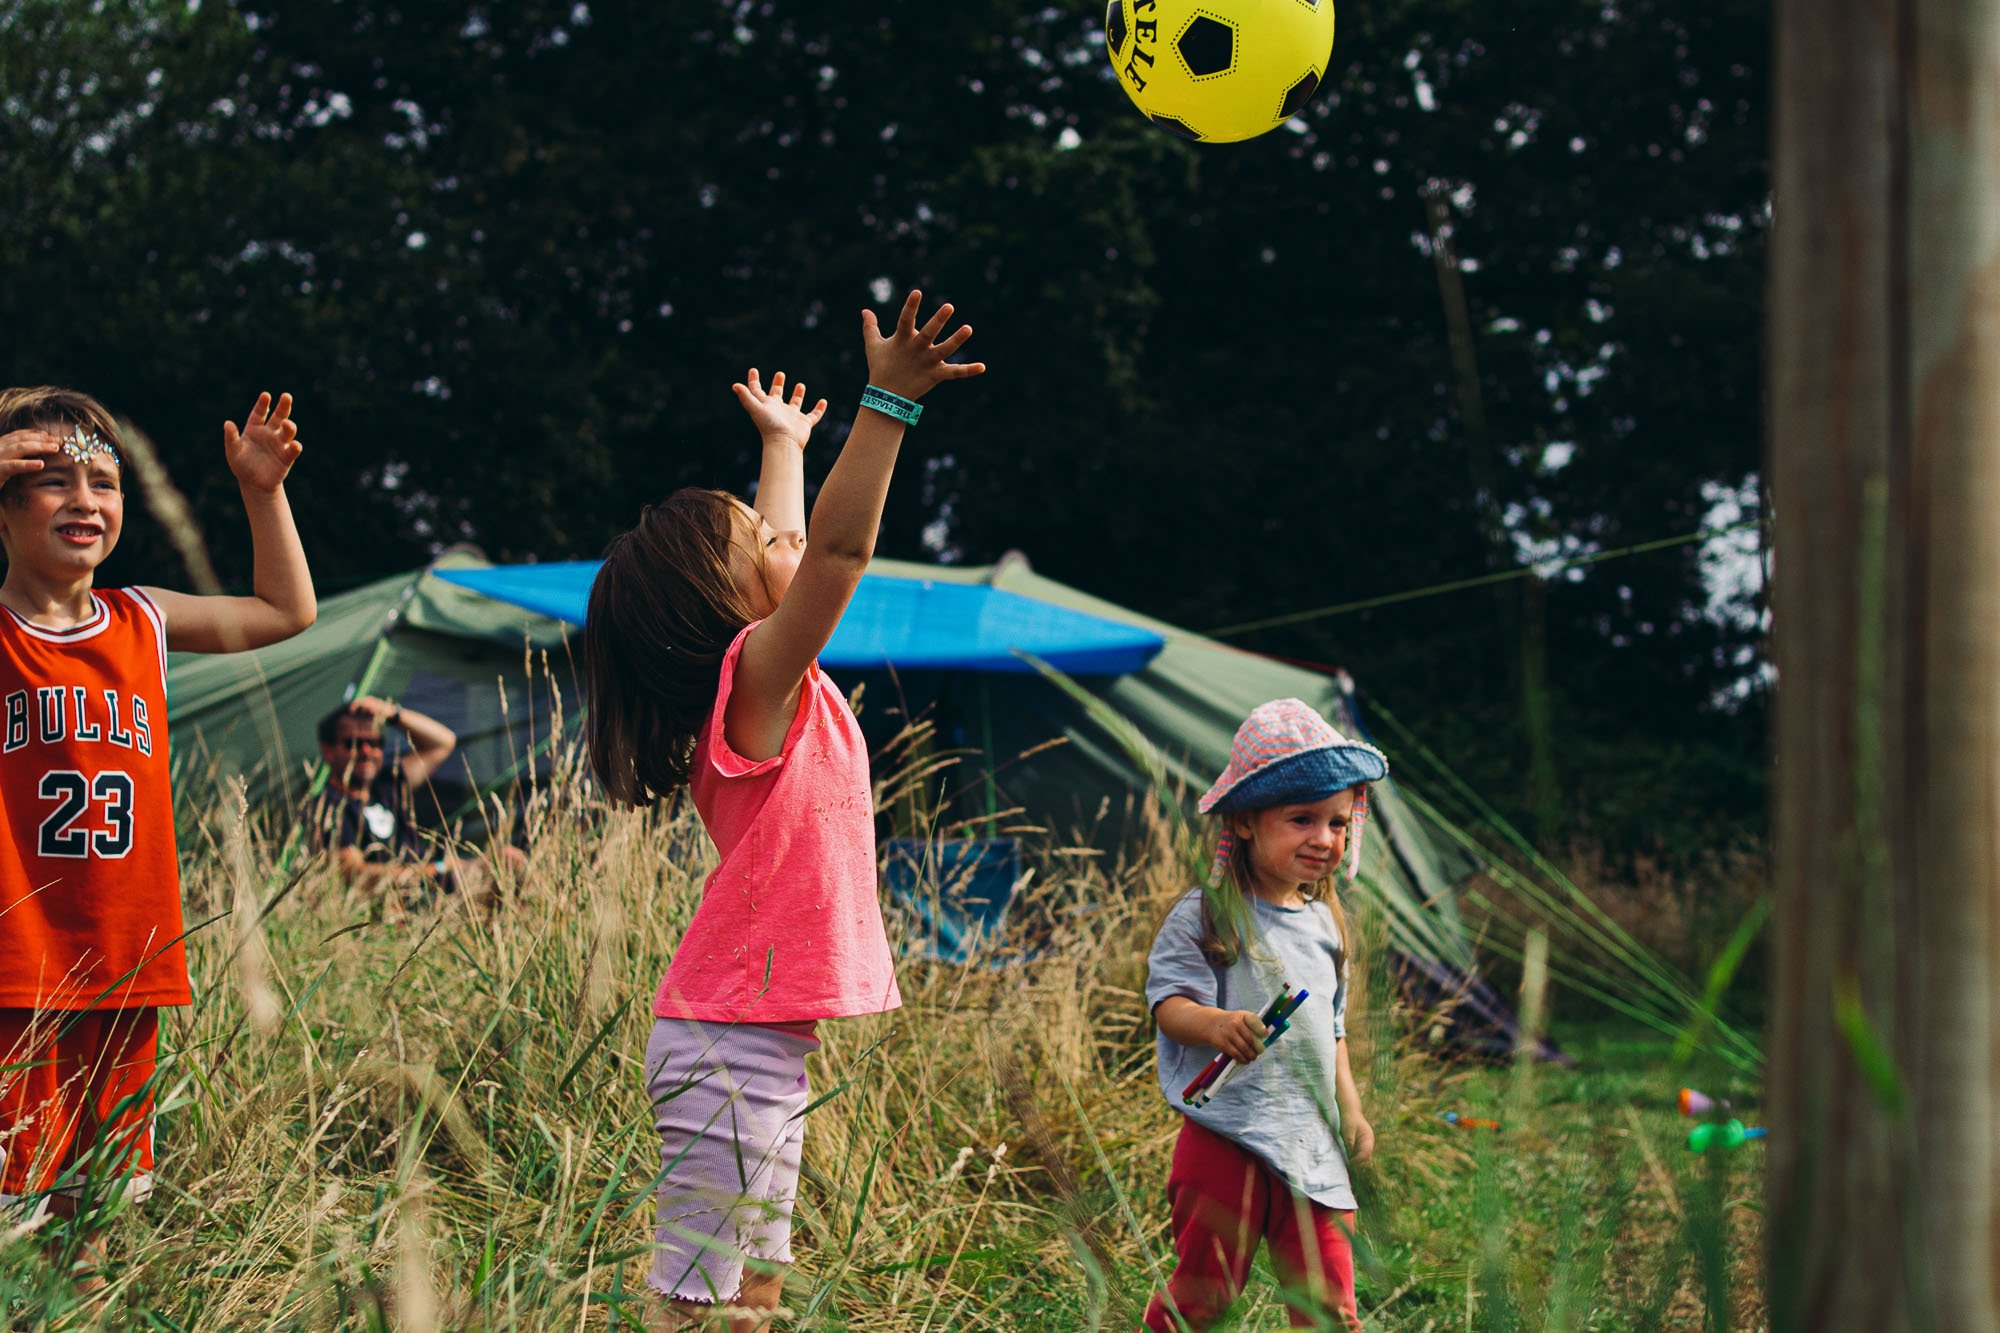 ball-in-the-air-kids-playing-campsite-sussex-family-photographer-natural-unposed-documentary-family-photos.jpg